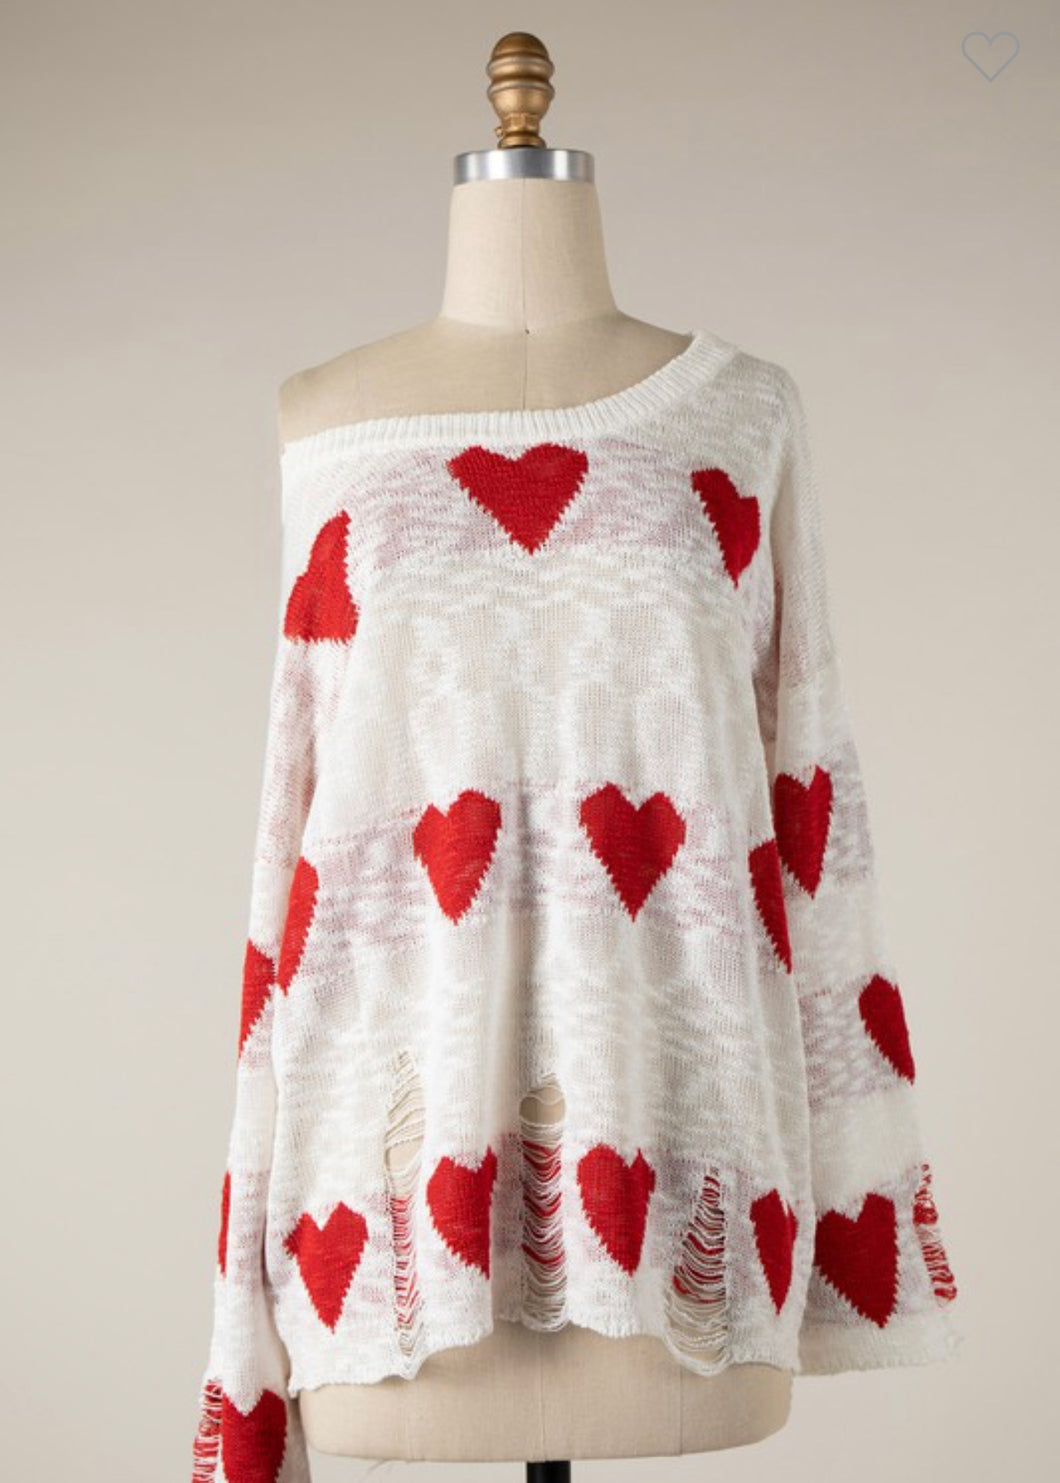 Heart Pattern Distressed Sheer Sweater Top